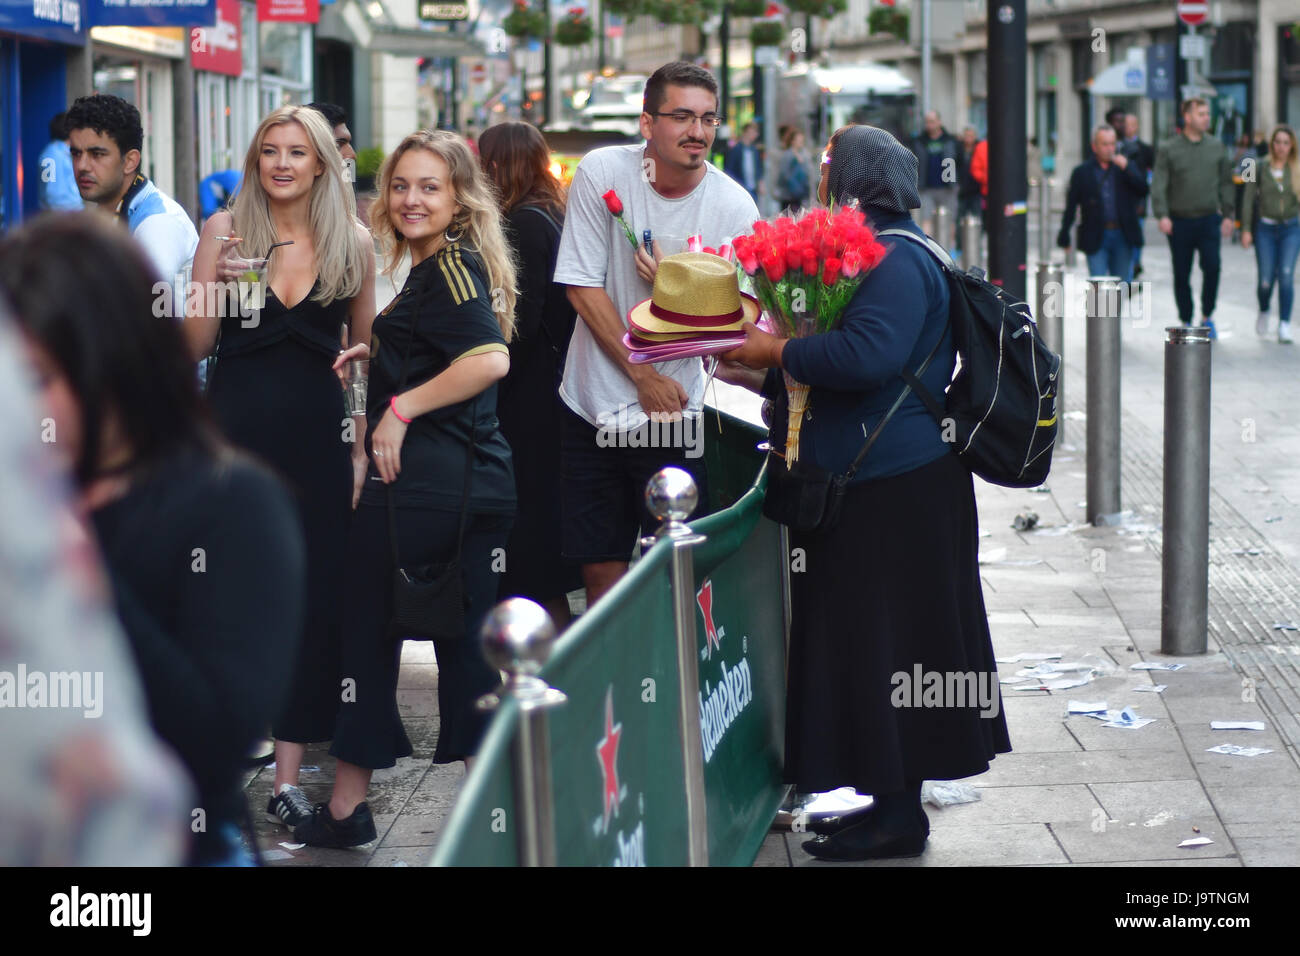 CARDIFF, UK. 3rd June, 2017. Flower seller and partygoers during Champions League Final. British security services on high alert as hundreds of thousands of fans enjoy football in the capital of Wales Credit: Ian Redding/Alamy Live News Stock Photo